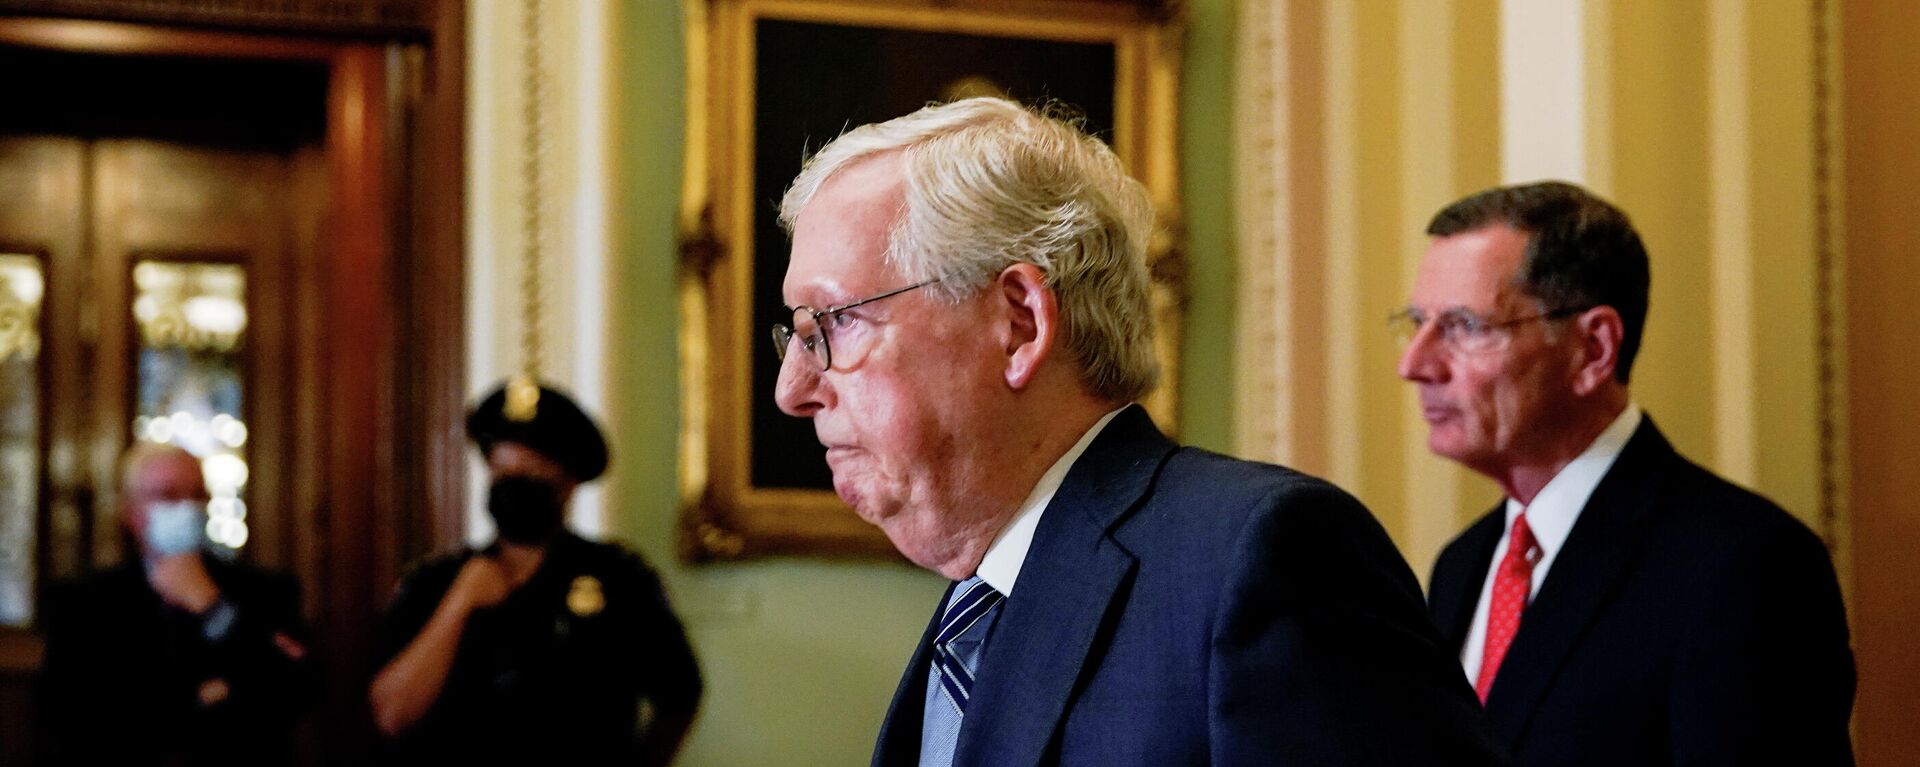 U.S. Senate Republican Leader Mitch McConnell (R-KY) is followed by Senator John Barrasso (R-WY) prior to the Senate Republicans weekly policy lunch at the U.S. Capitol in Washington, U.S., September 28, 2021. - Sputnik International, 1920, 04.10.2021